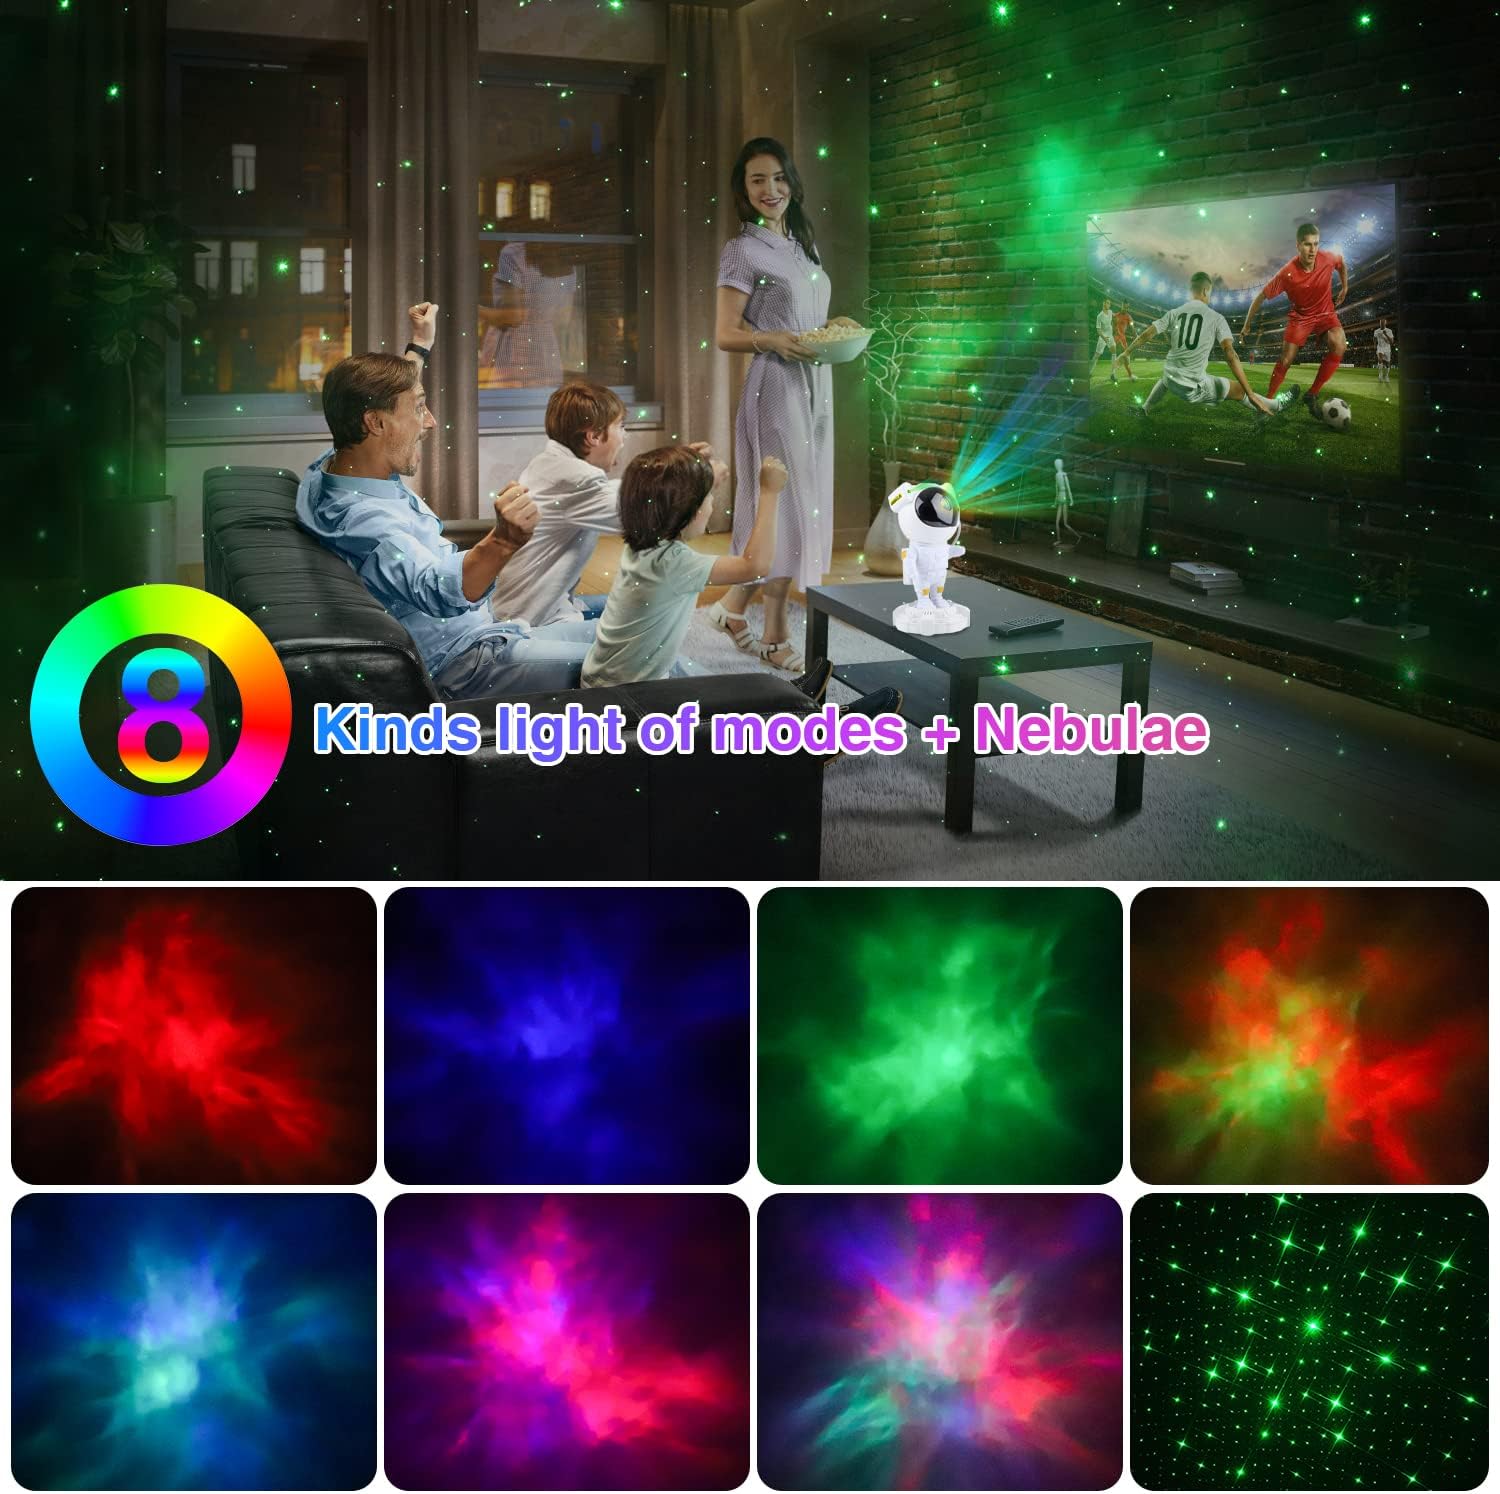 LED-Ceiling-Lights-Rechargable-Astronaut-Night-Light-Projector-With-Bluetooth-Music-Speaker-11